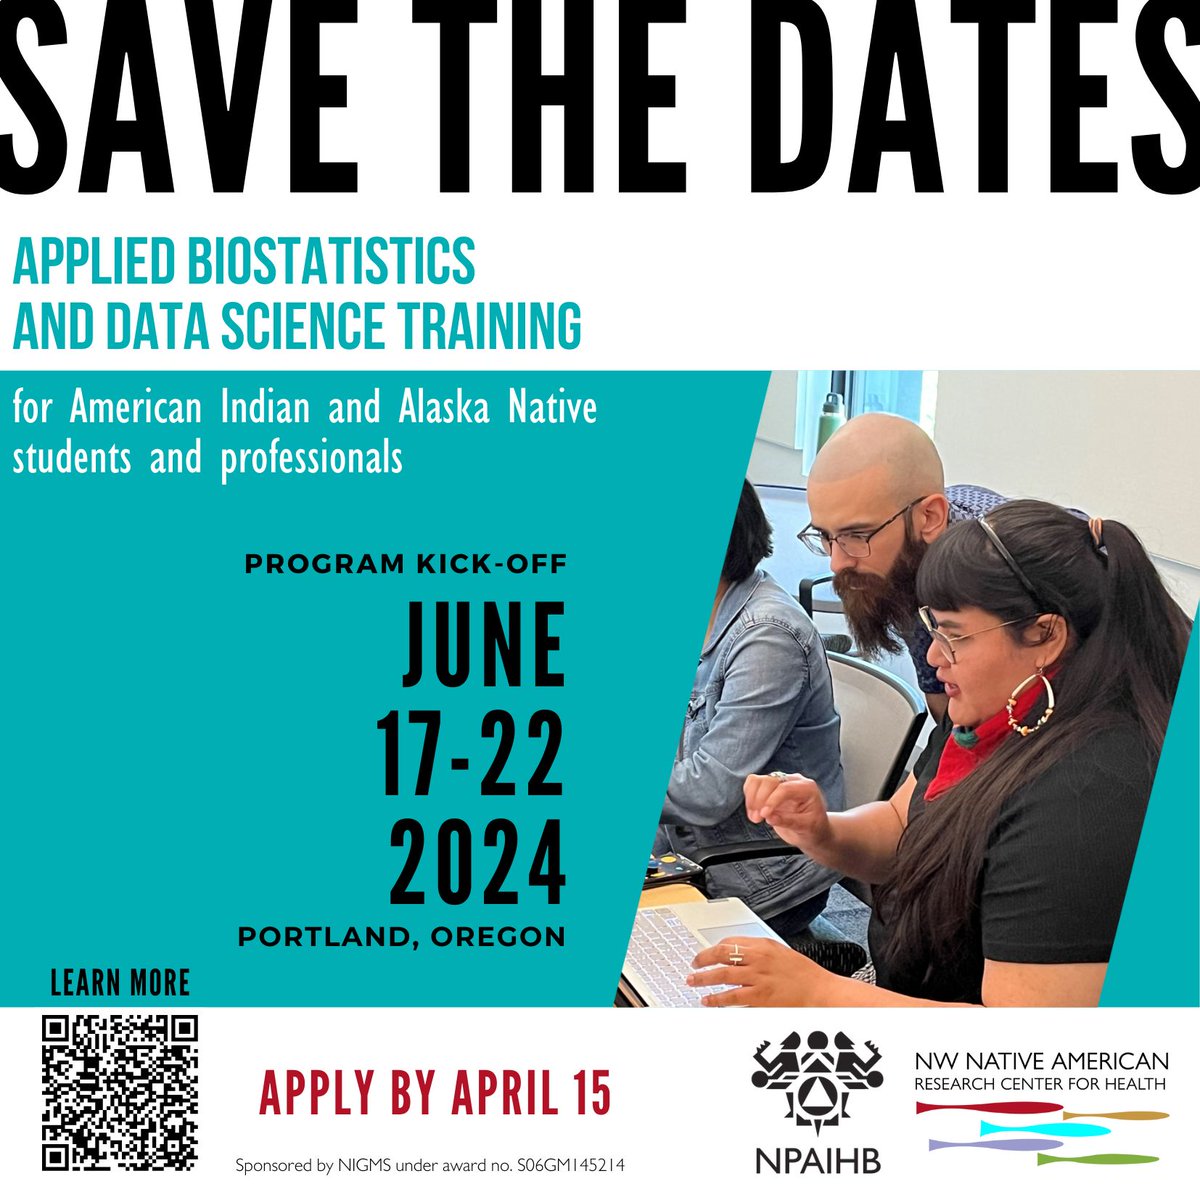 Are you interested in building quantitative skills? Apply for the Northwest Native American Research Center for Health’s training program in applied biostatistics and data science – applications are due April 15, 2024. More info at npaihb.org/applied-biosta… #NativeTwitter